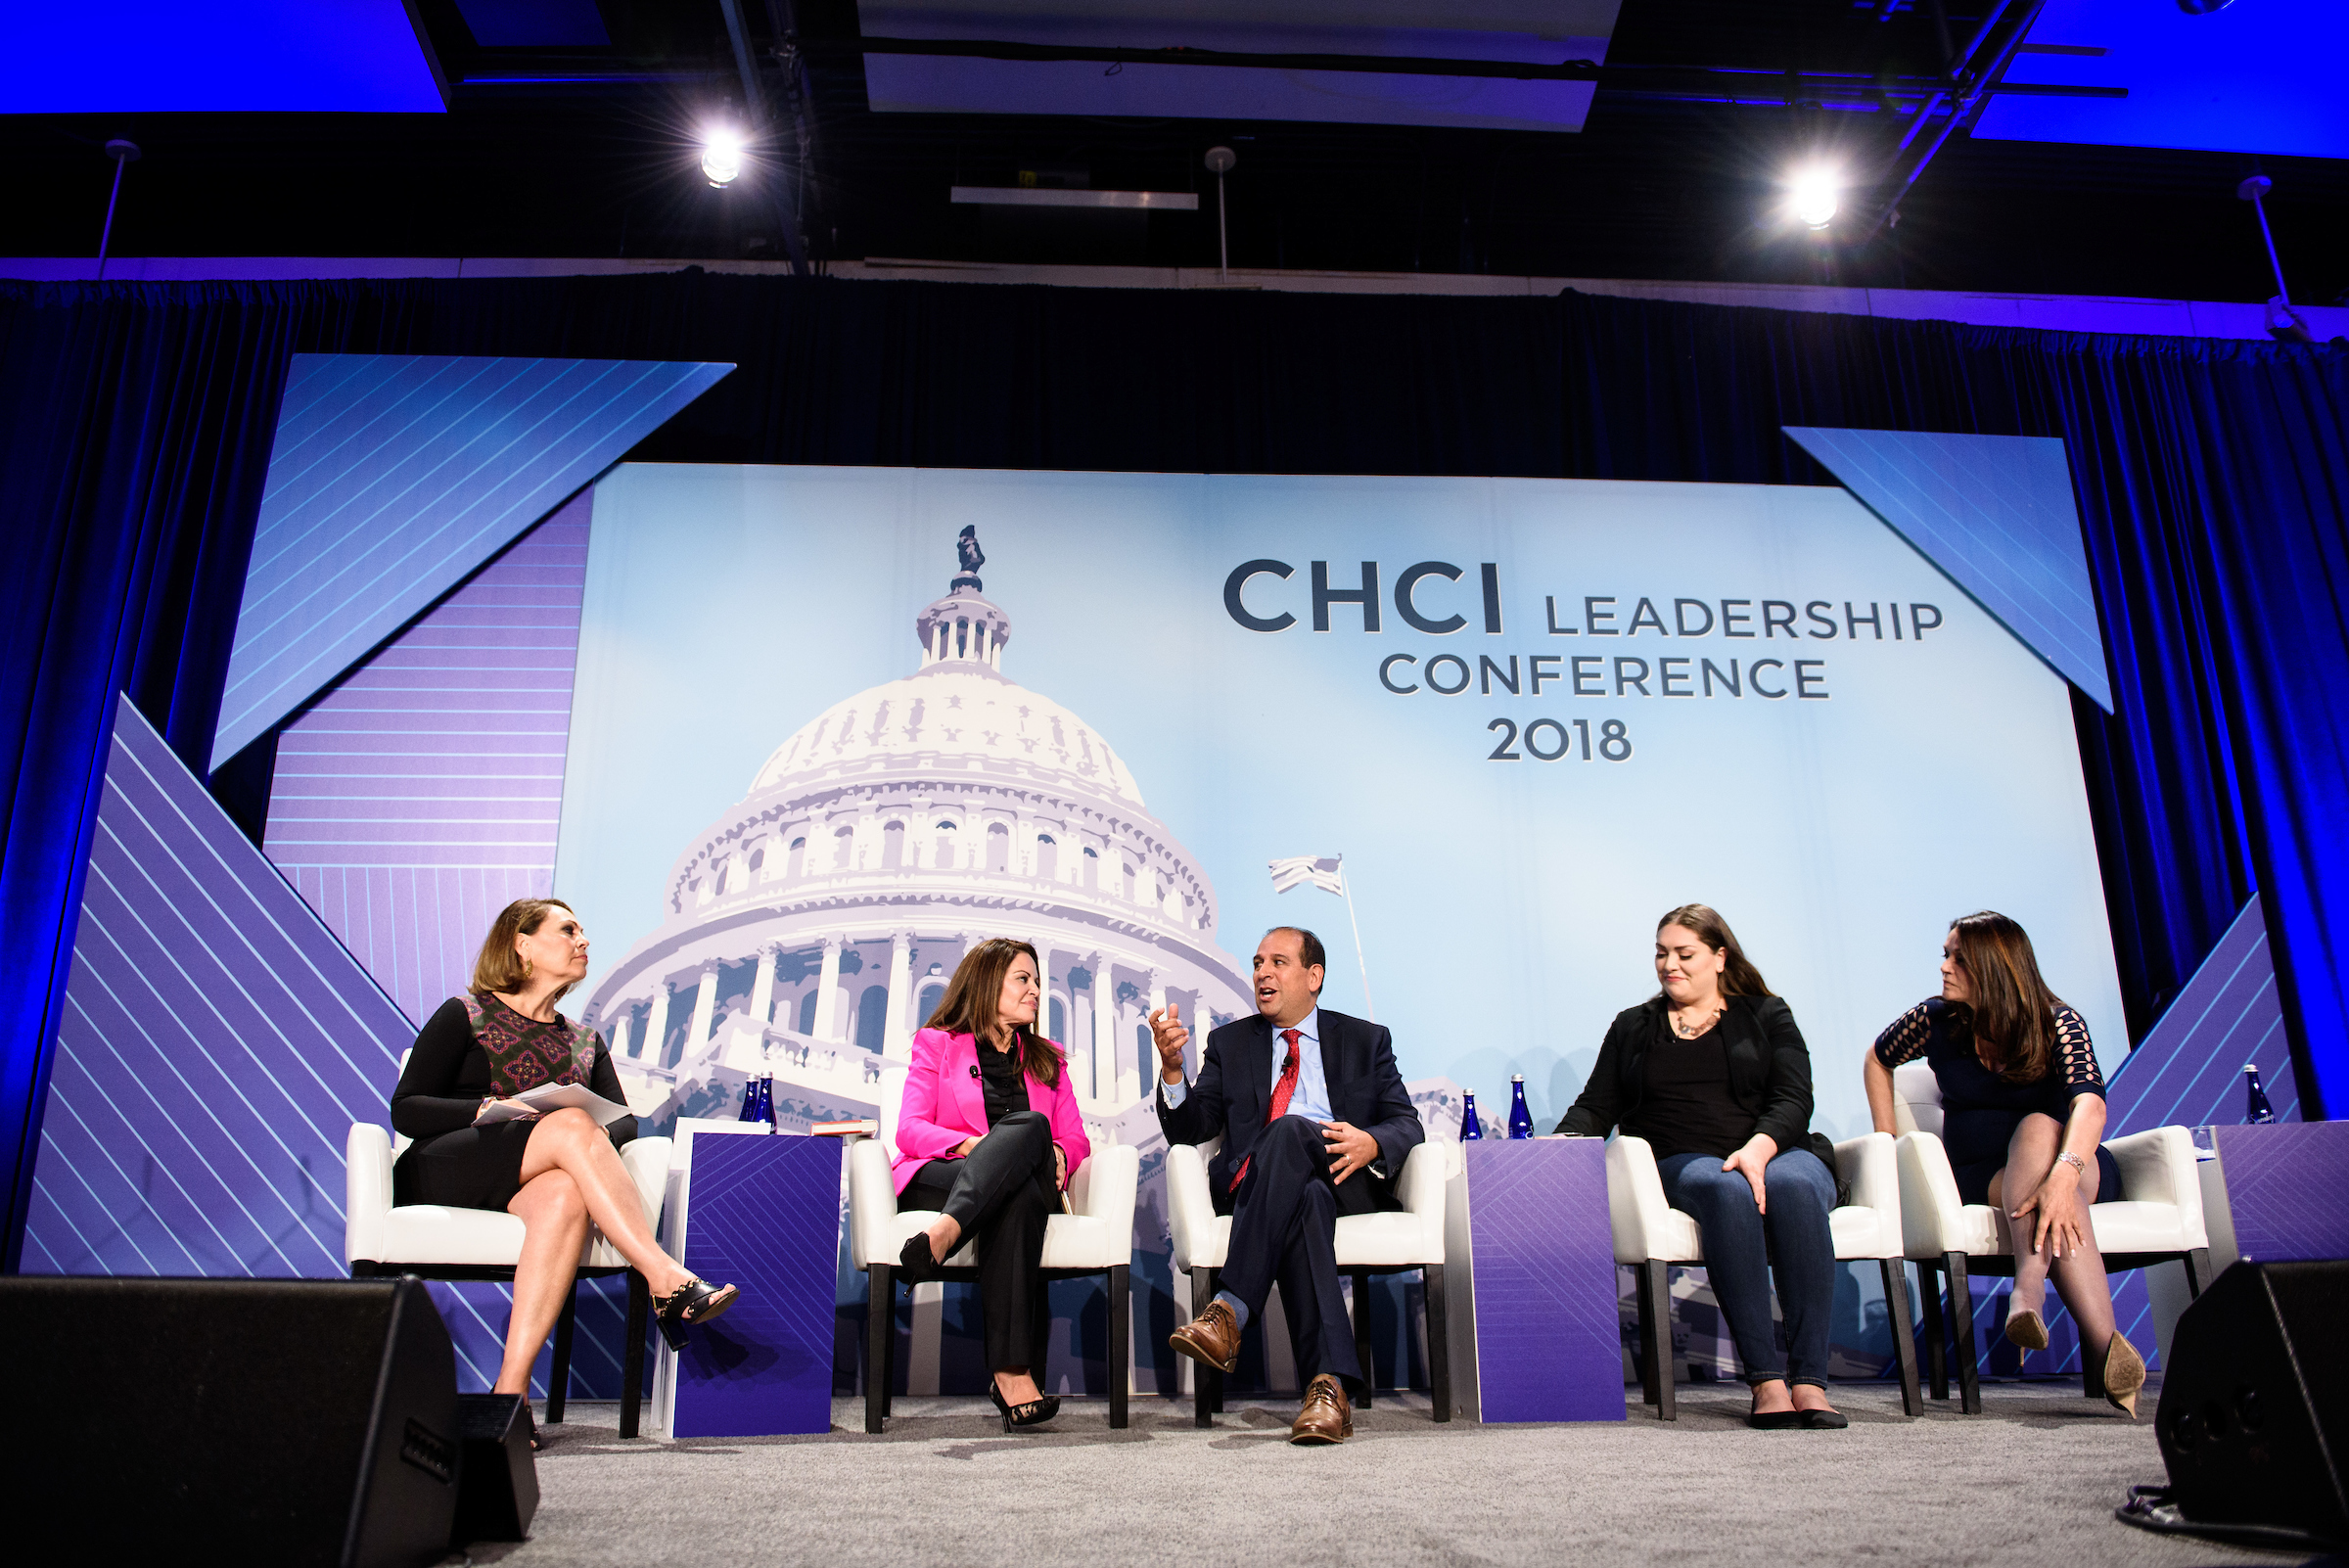 CHCI Leadership Conference on September 11th, 2018.